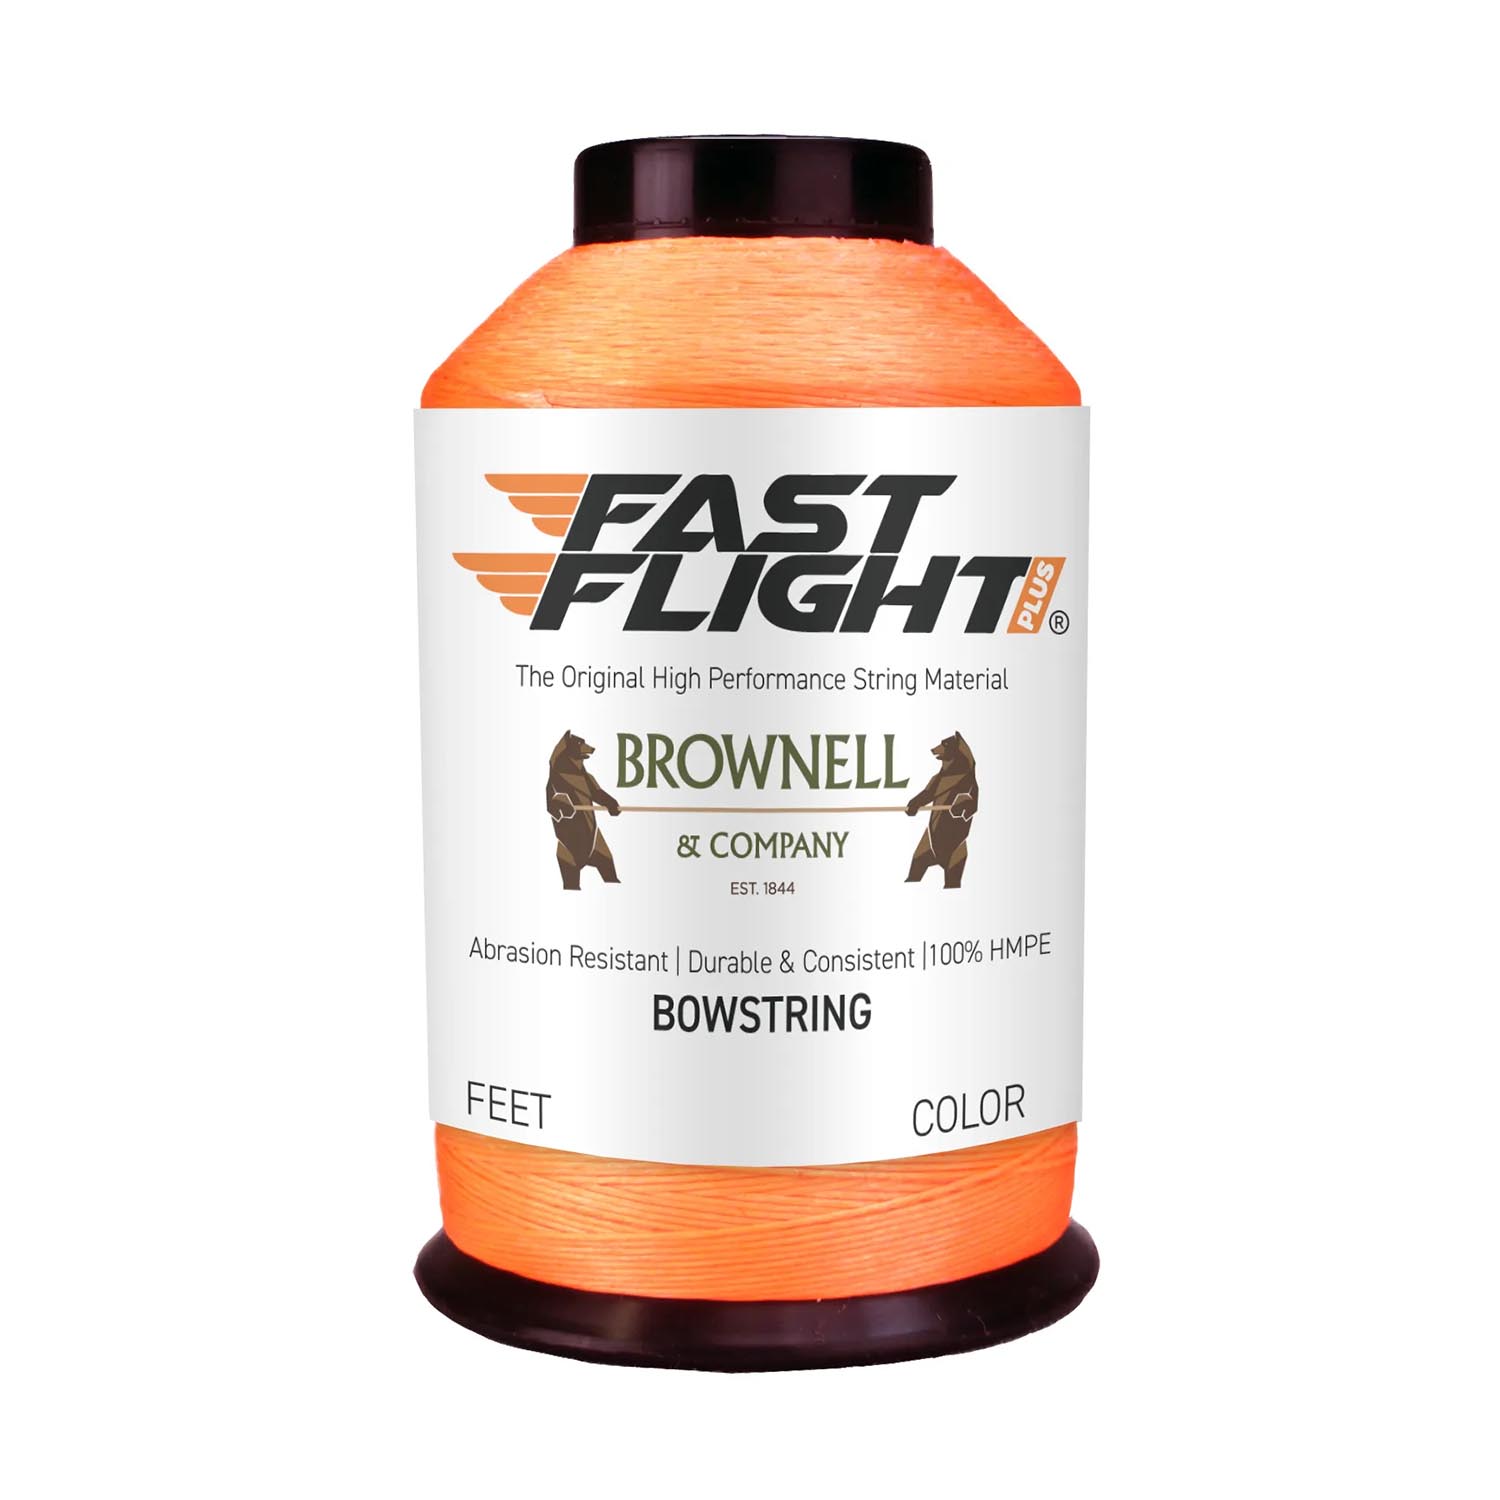  Buy Brownell Bowstring Material Fast Flight Plus 1/4  lbs online